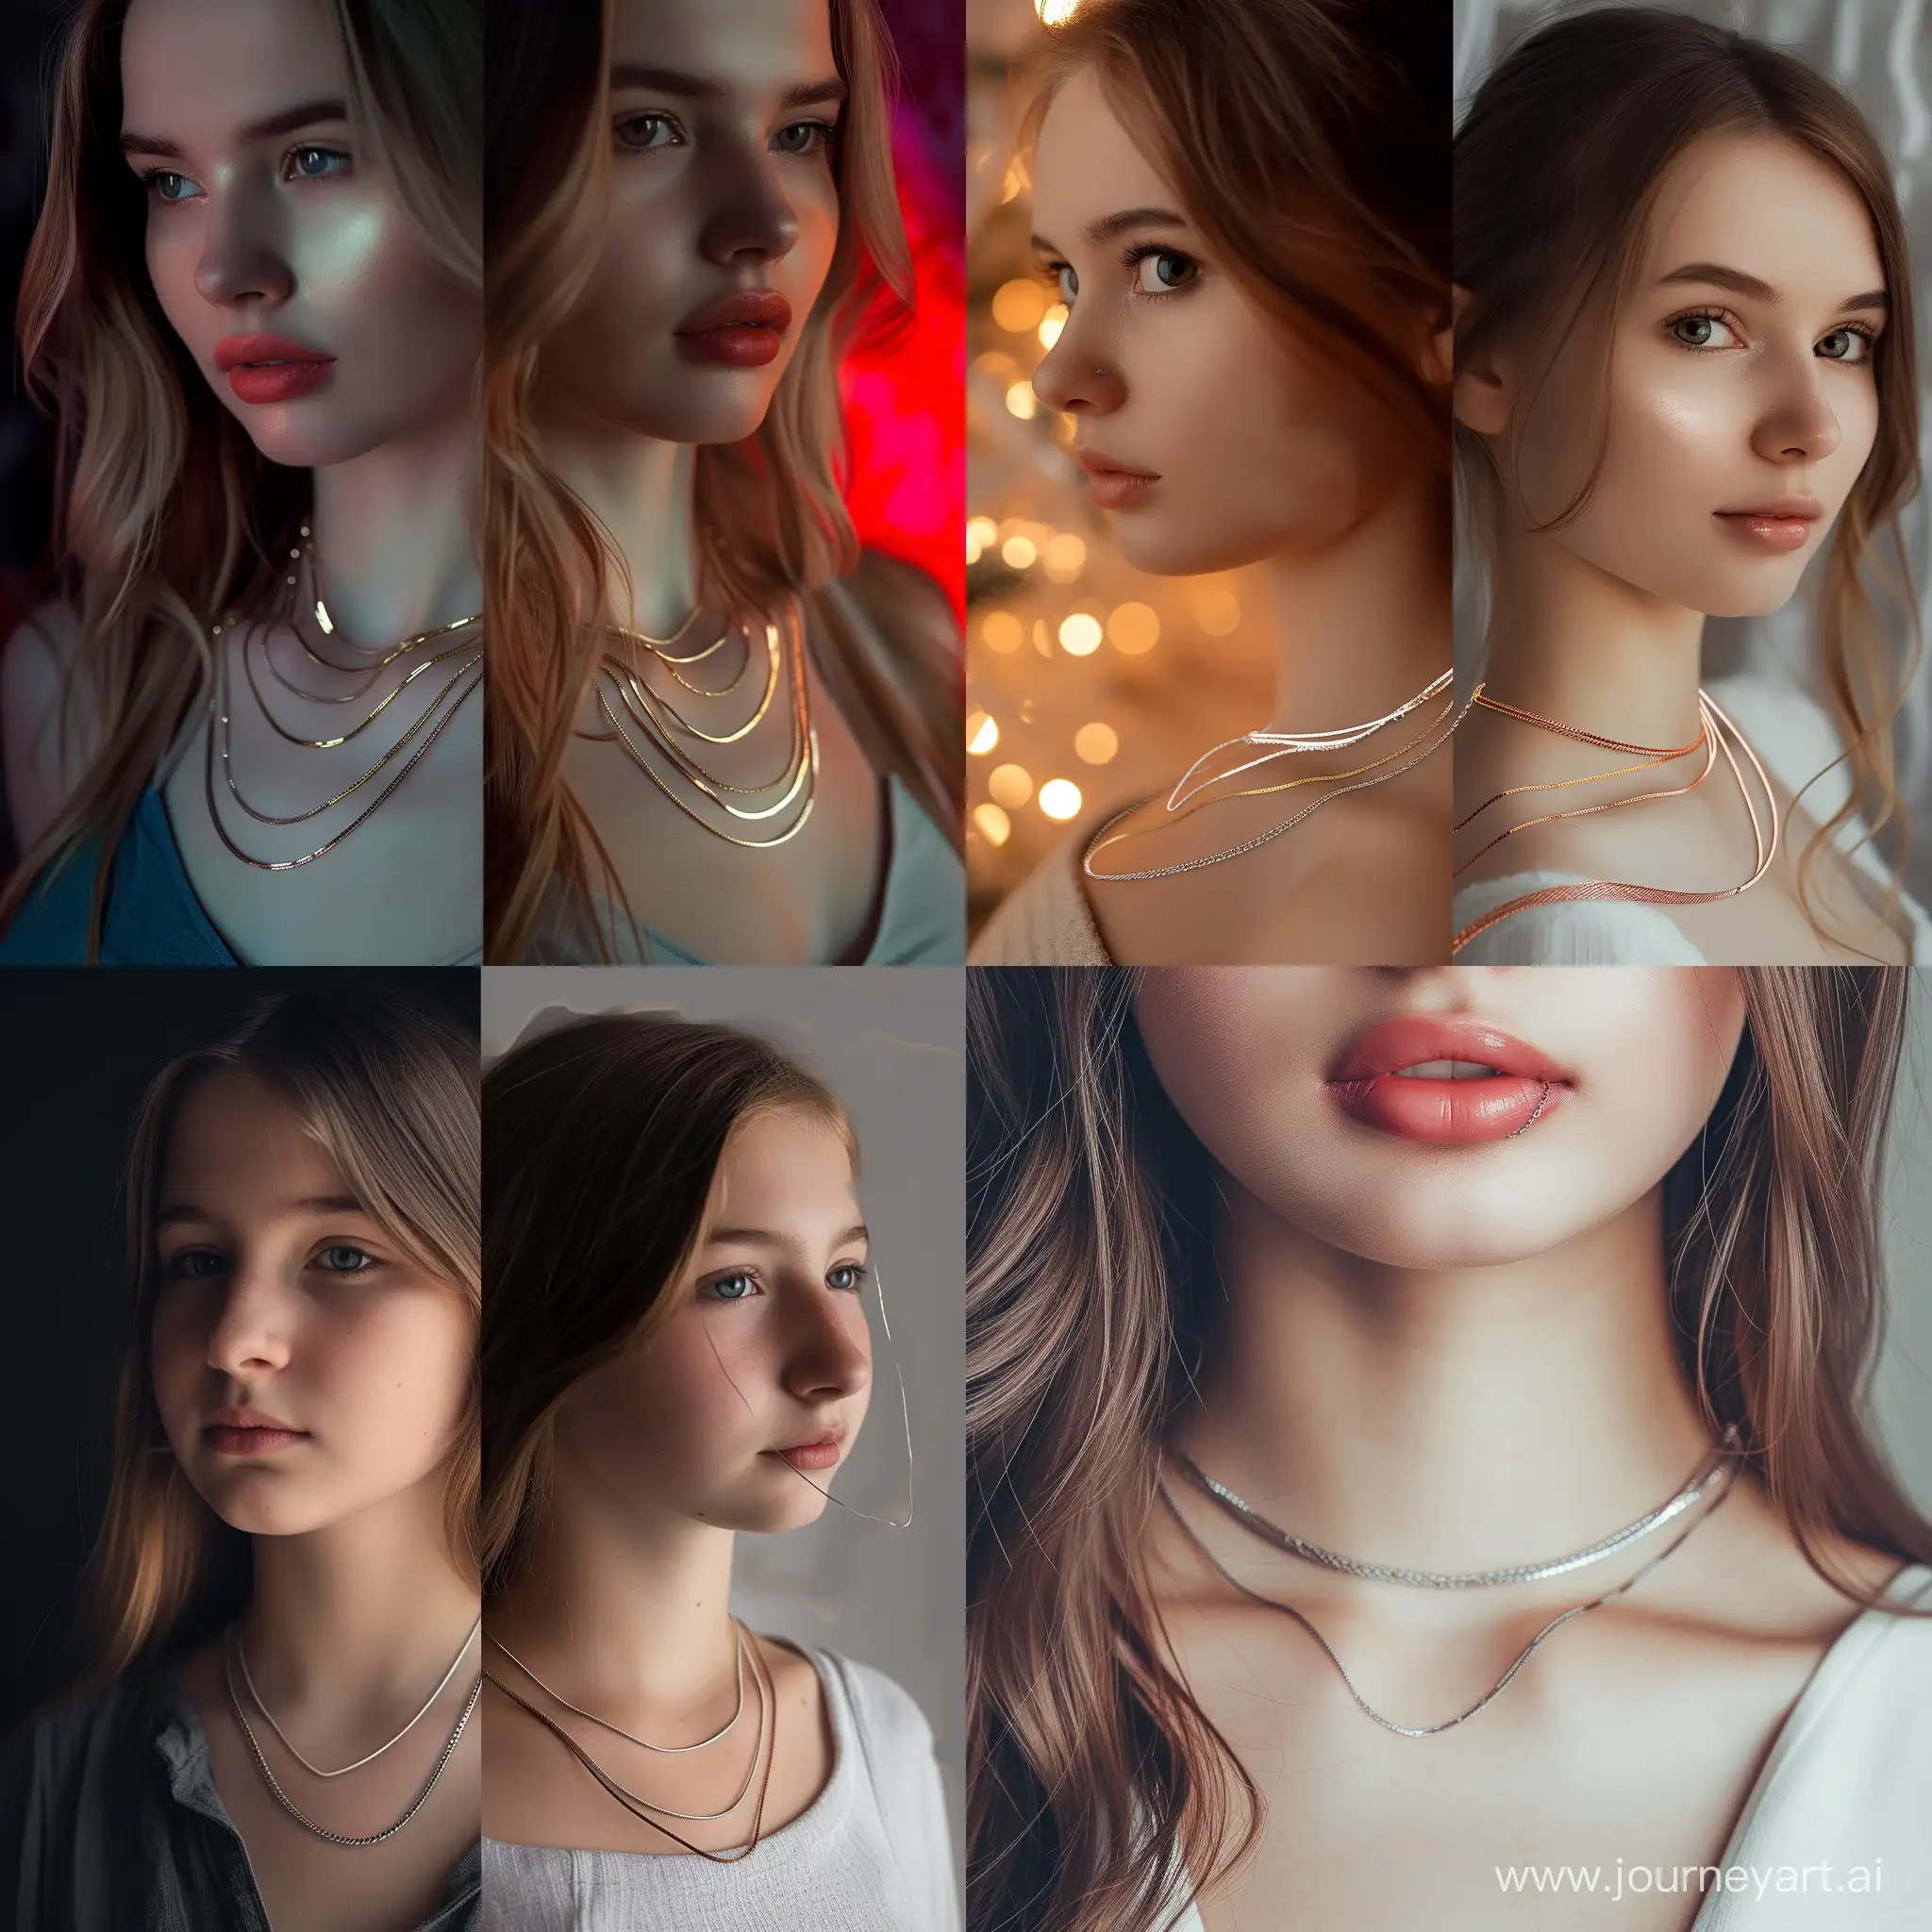 A photo was taken of an elegant and beautiful Caucasian girl, showing only 1 different thin metal necklace she was wearing around her neck. Necklaces of different colors and materials show the girl's personality and taste. Necklaces can vary in length and layering to create a unique visual effect. Through the processing of light and details, the brightness and texture of the necklace are highlighted. Make sure that the girl's image and the necklace she designs complement each other, balancing and complementing each other. The final design is a real photo, and the final design should be stylish and impressive.